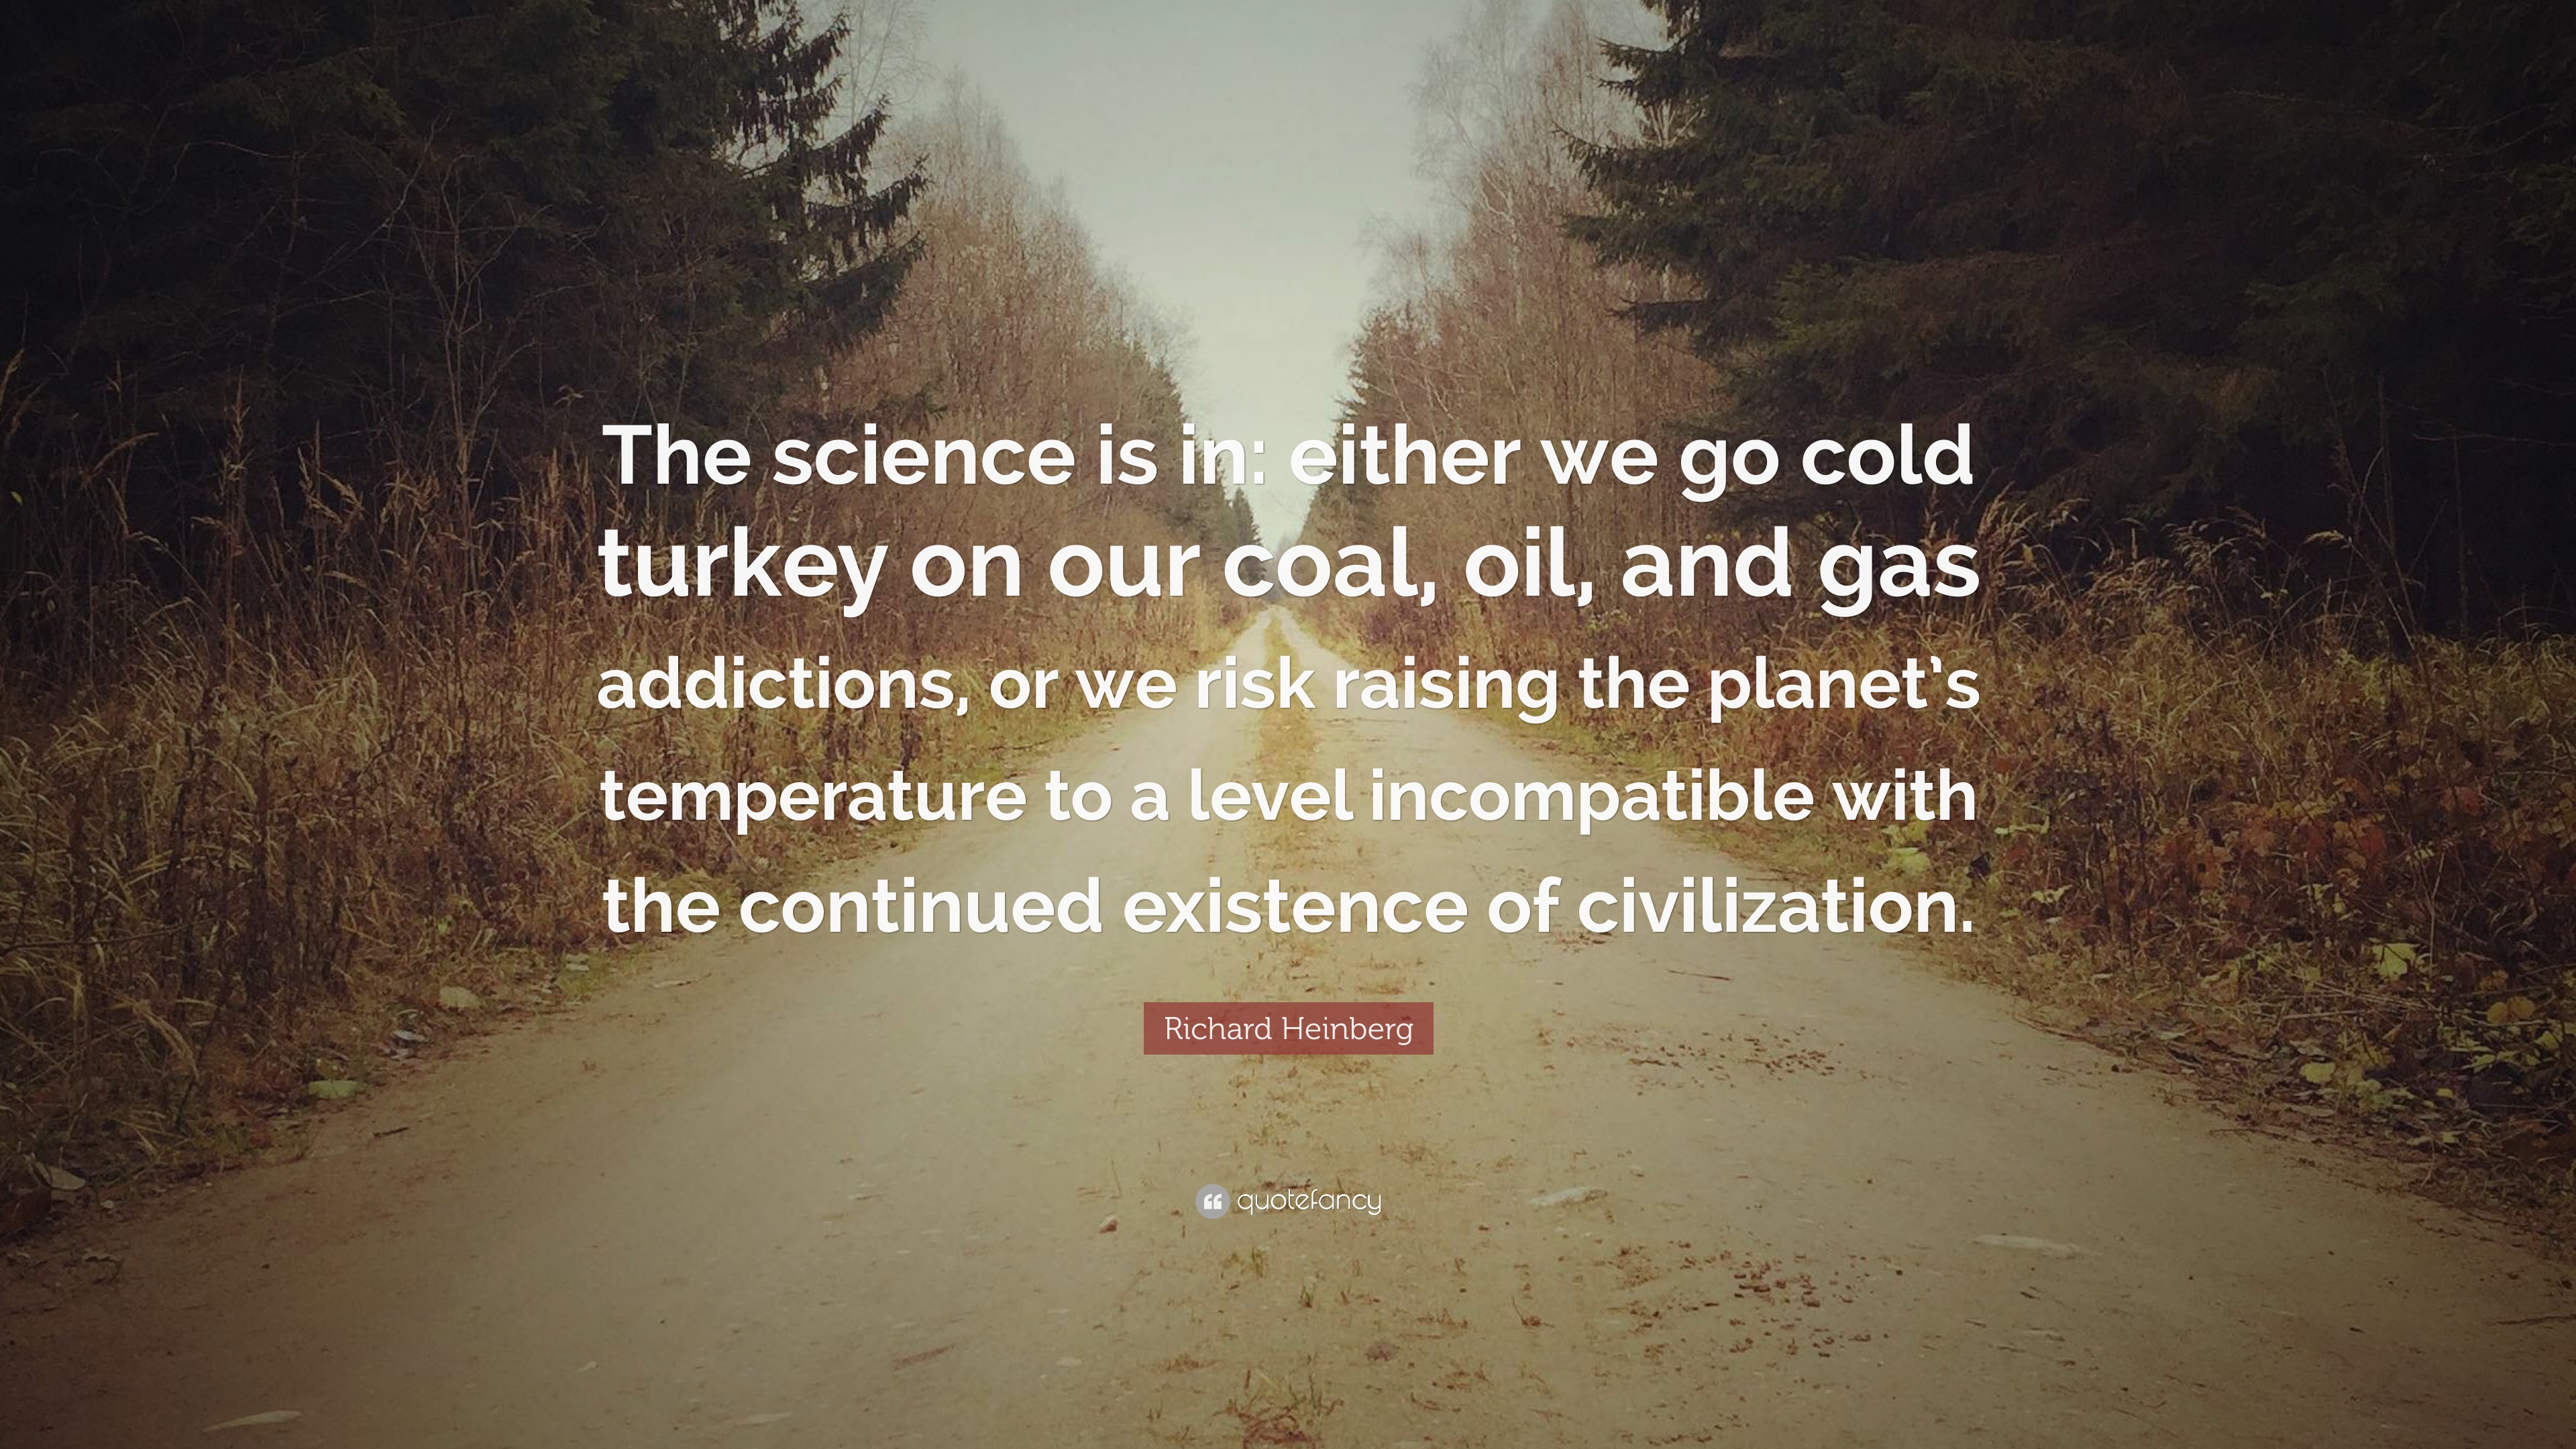 Richard Heinberg Quote: “The science is in: either we go cold